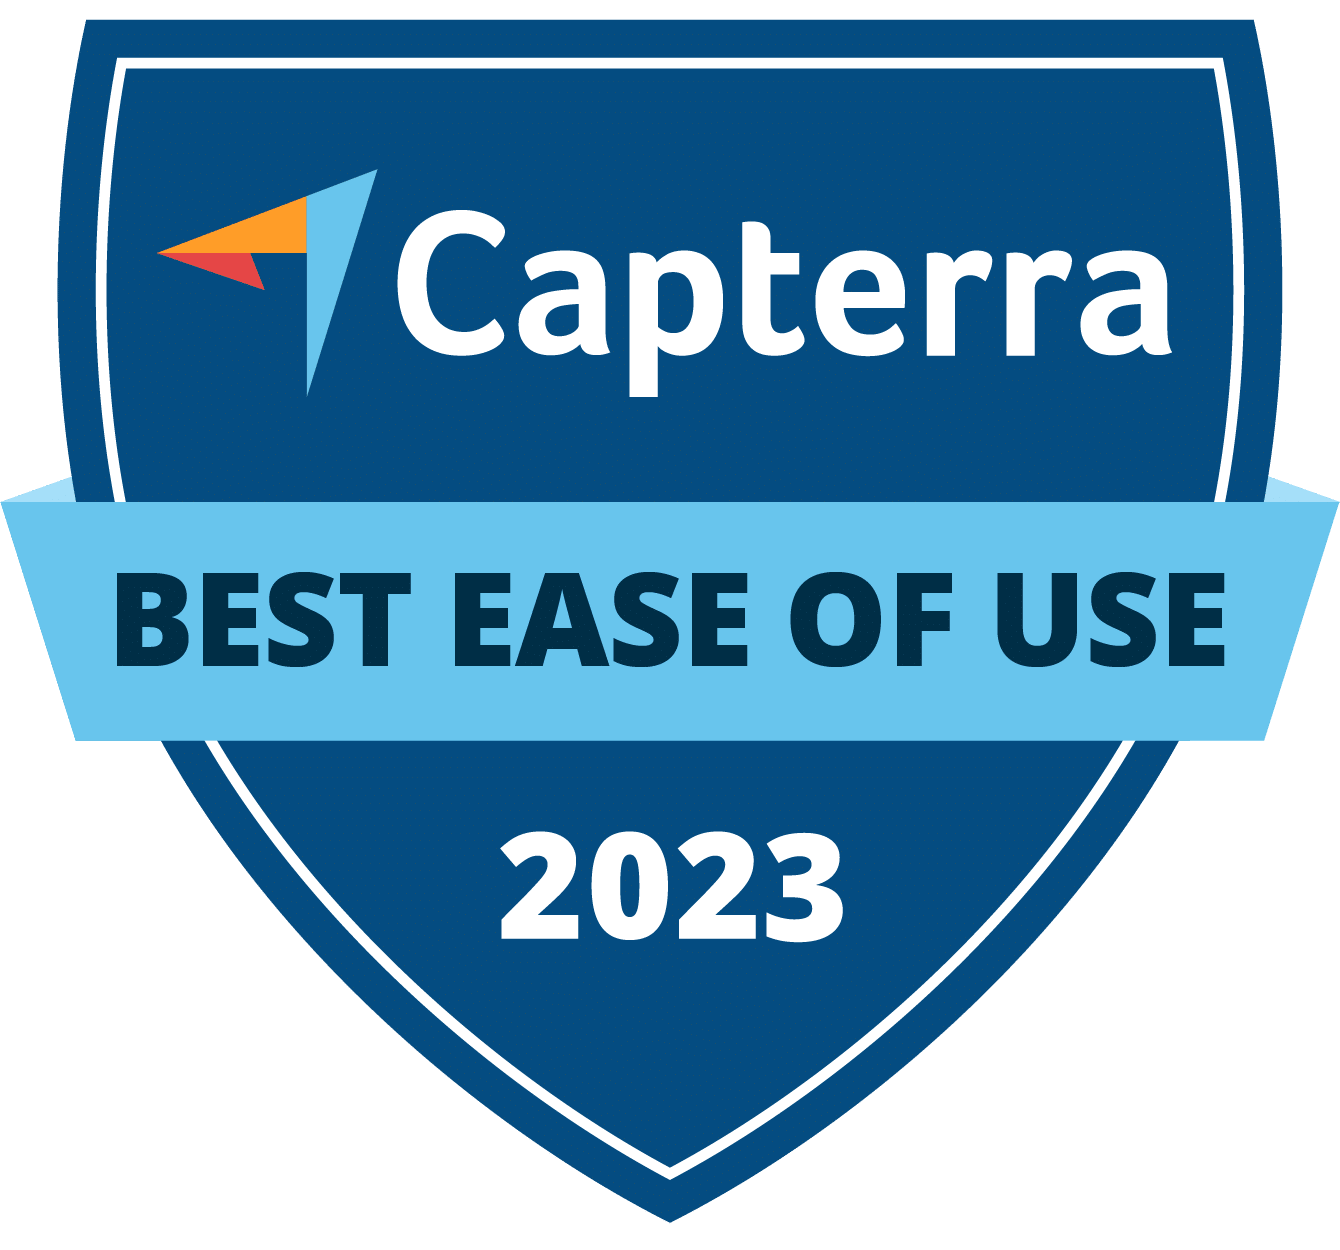 MyCase is awarded Best Ease of Use by Capterra in 2023